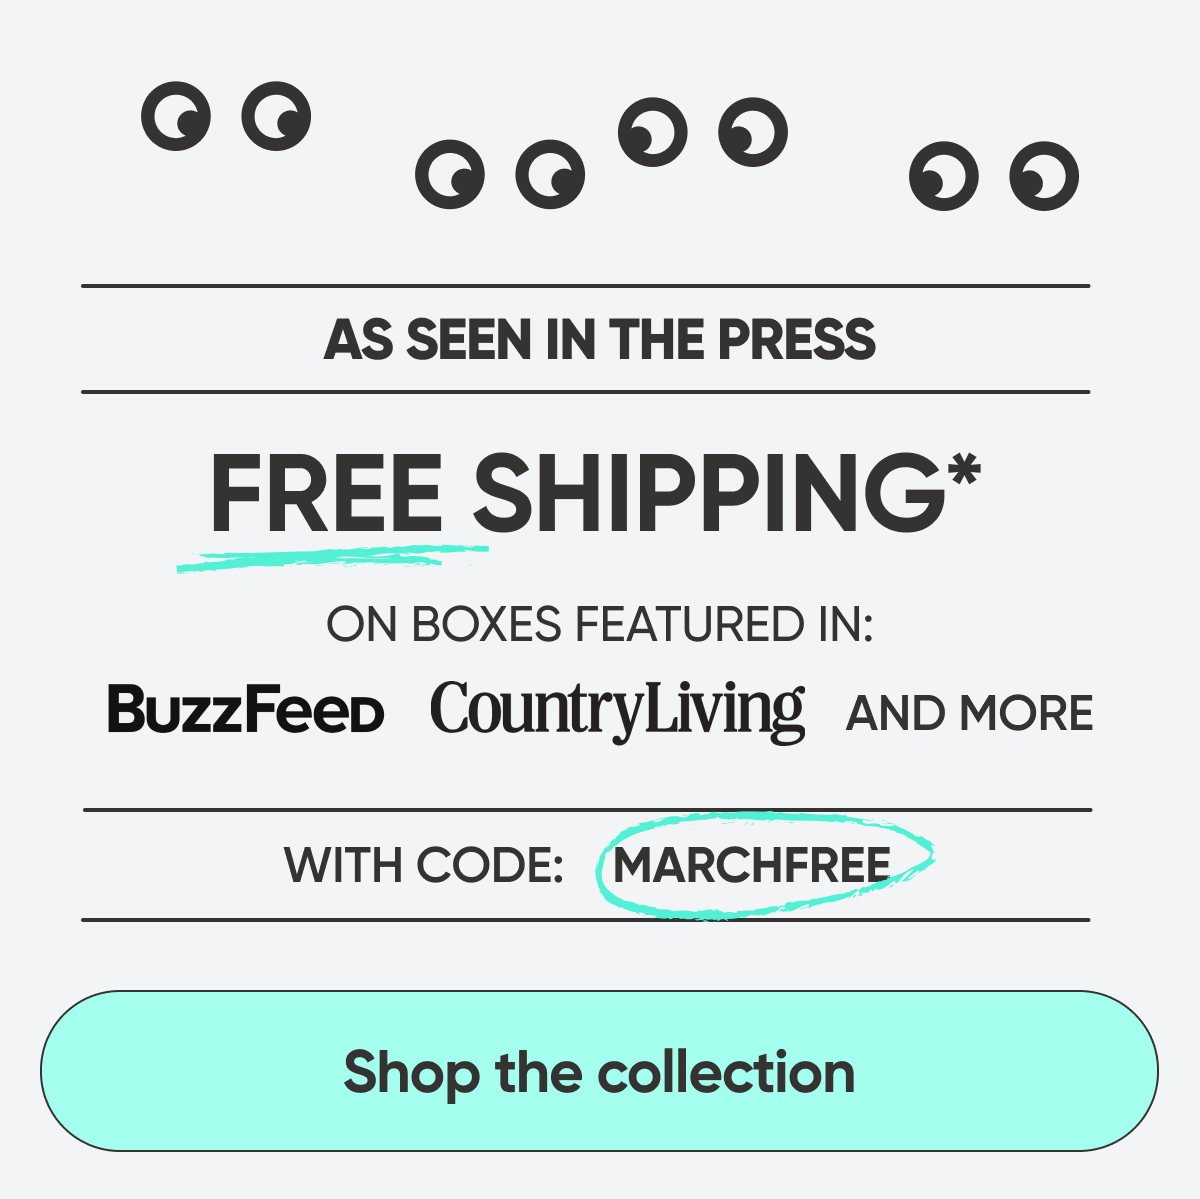 Free shipping* on boxes featured in:  Buzzfeed, Country Living, and more with code: MARCHFREE Shop The Collection